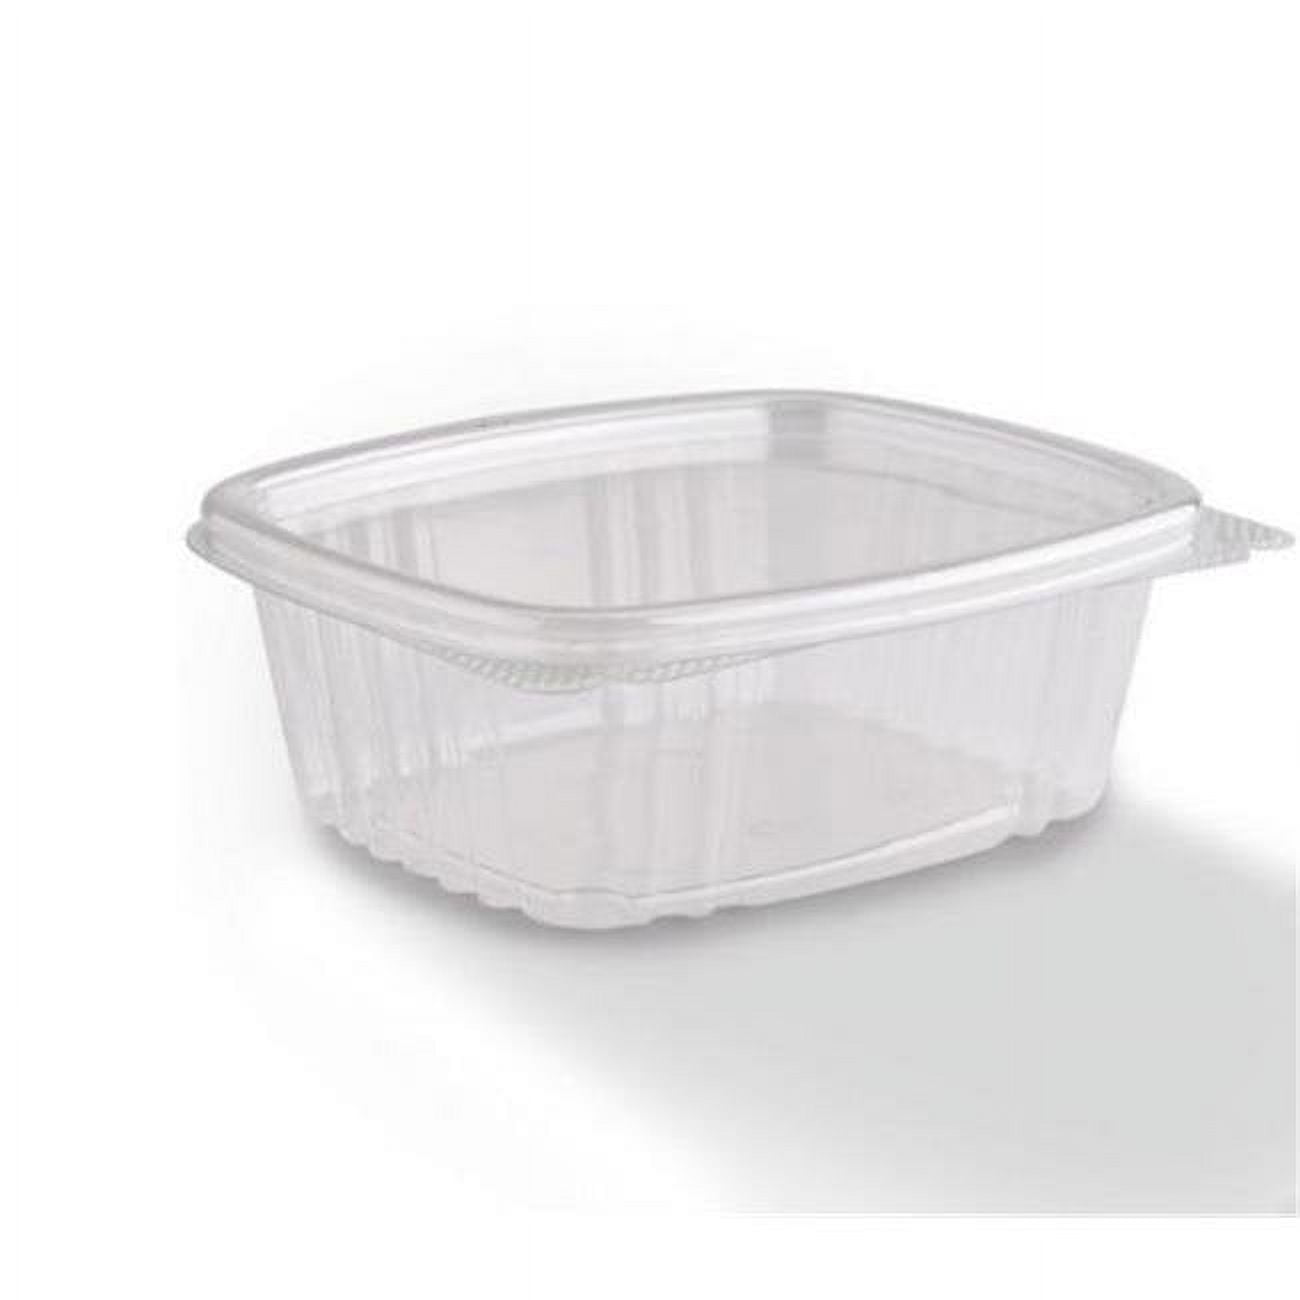 Ad08 Cpc 8 Oz Clear Hinged Flat Lid Deli Container, Case Of 200